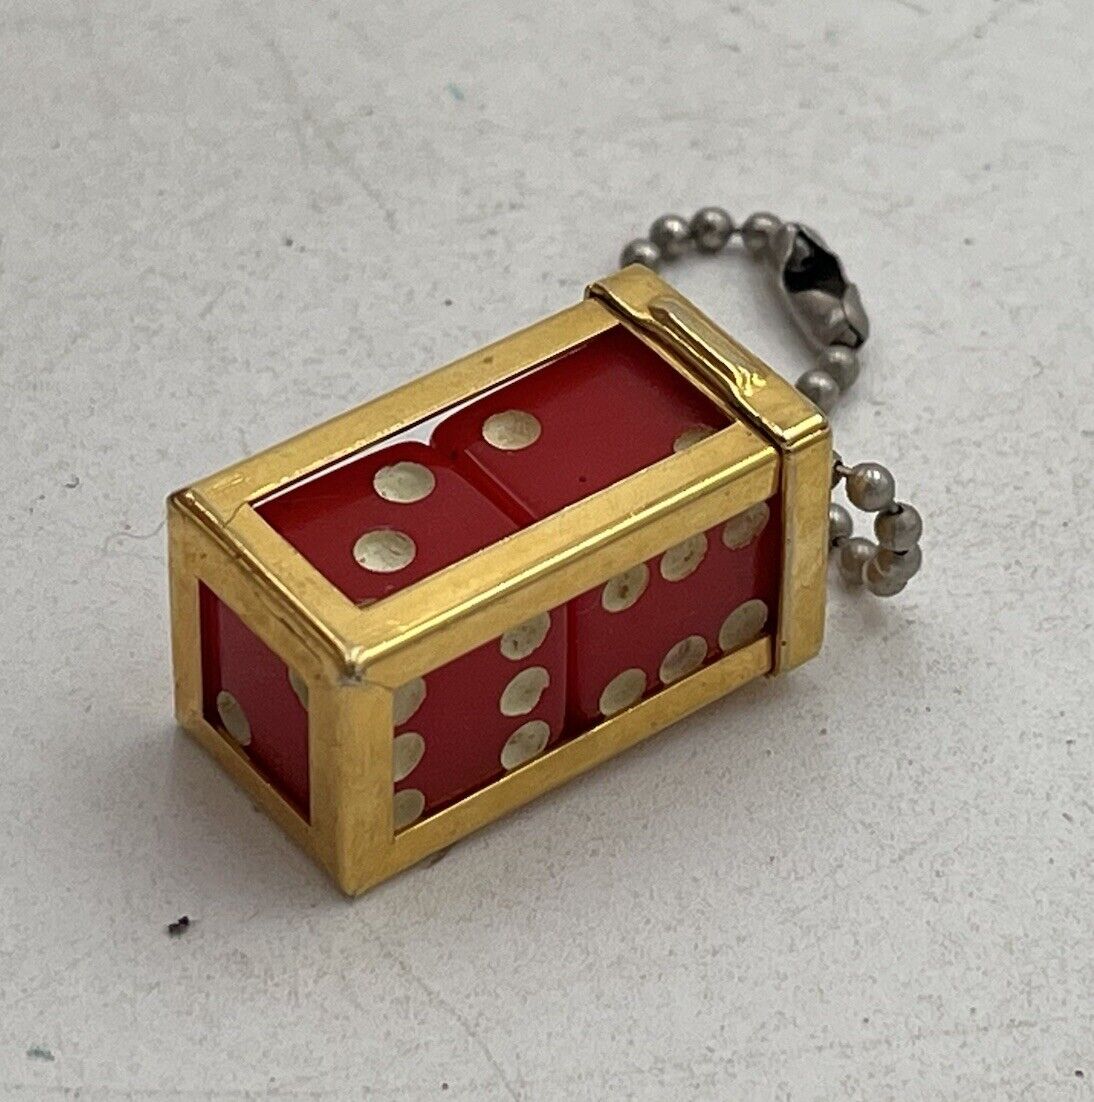 Vintage Crisloid? Caged Dice Keychain 1950s 60s Gambler Brass Gambling Retro